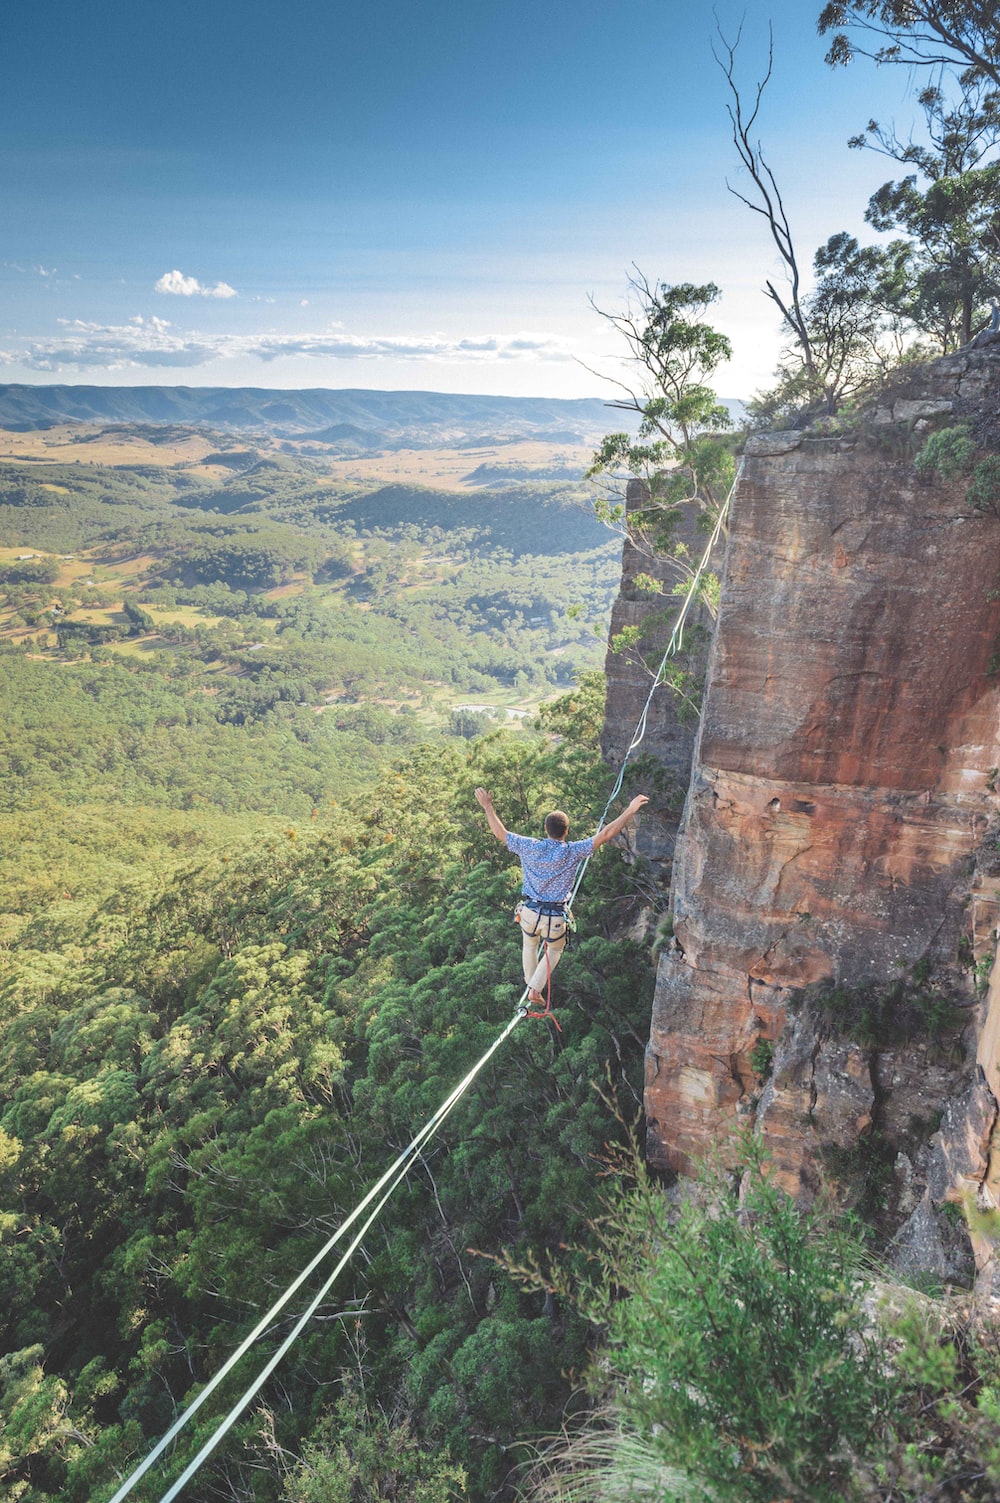 Not protecting your business effectively is like walking a tightrope